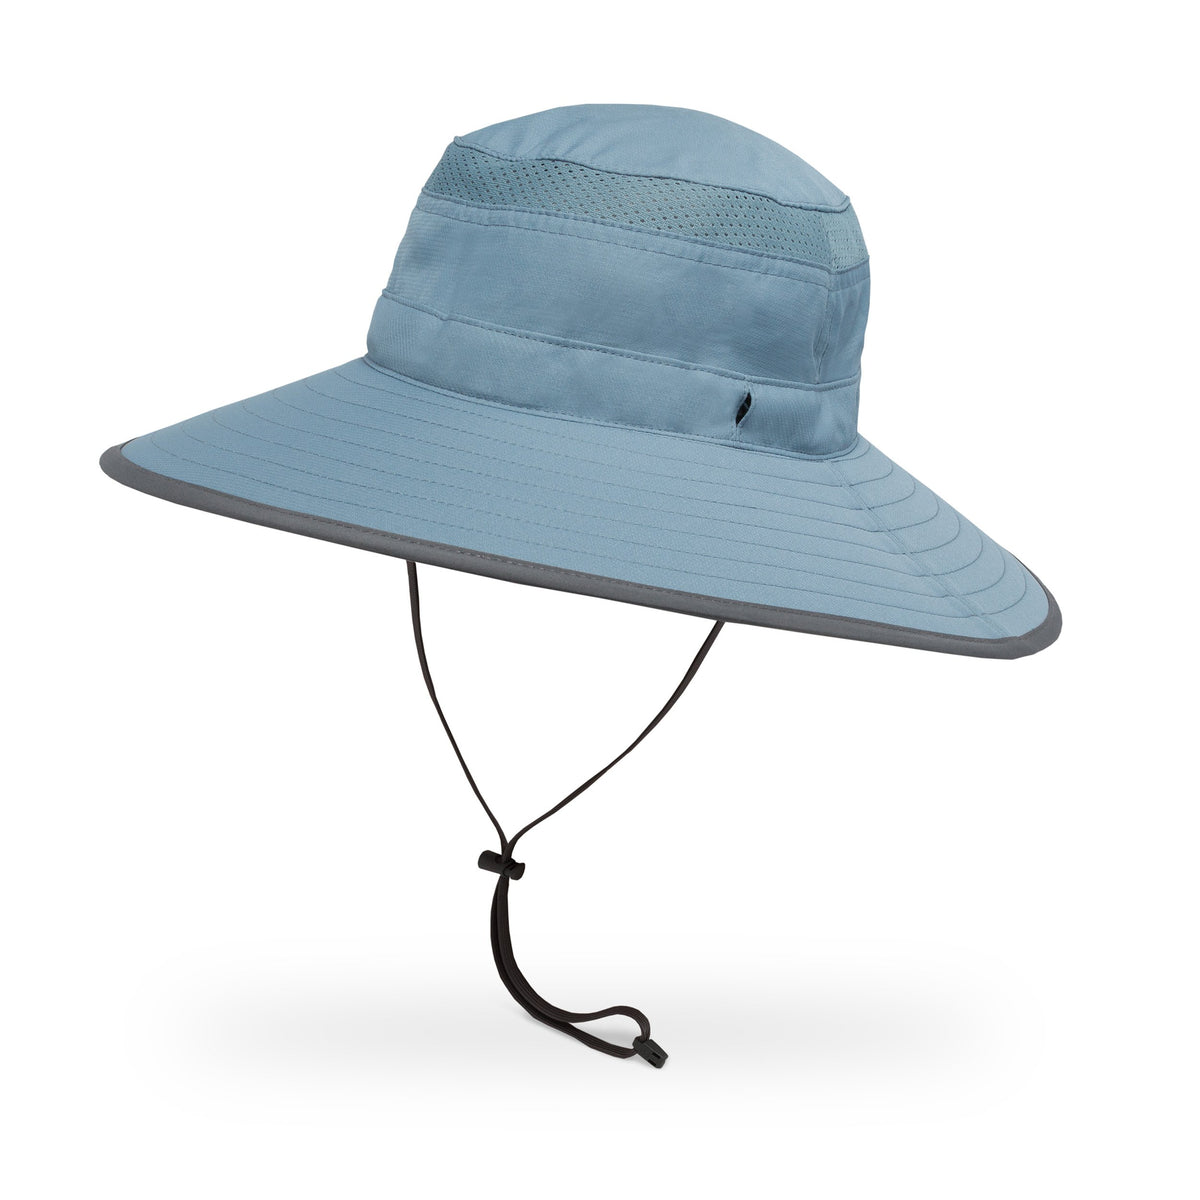 Sun Hats With Chin Strap at Village Hat Shop